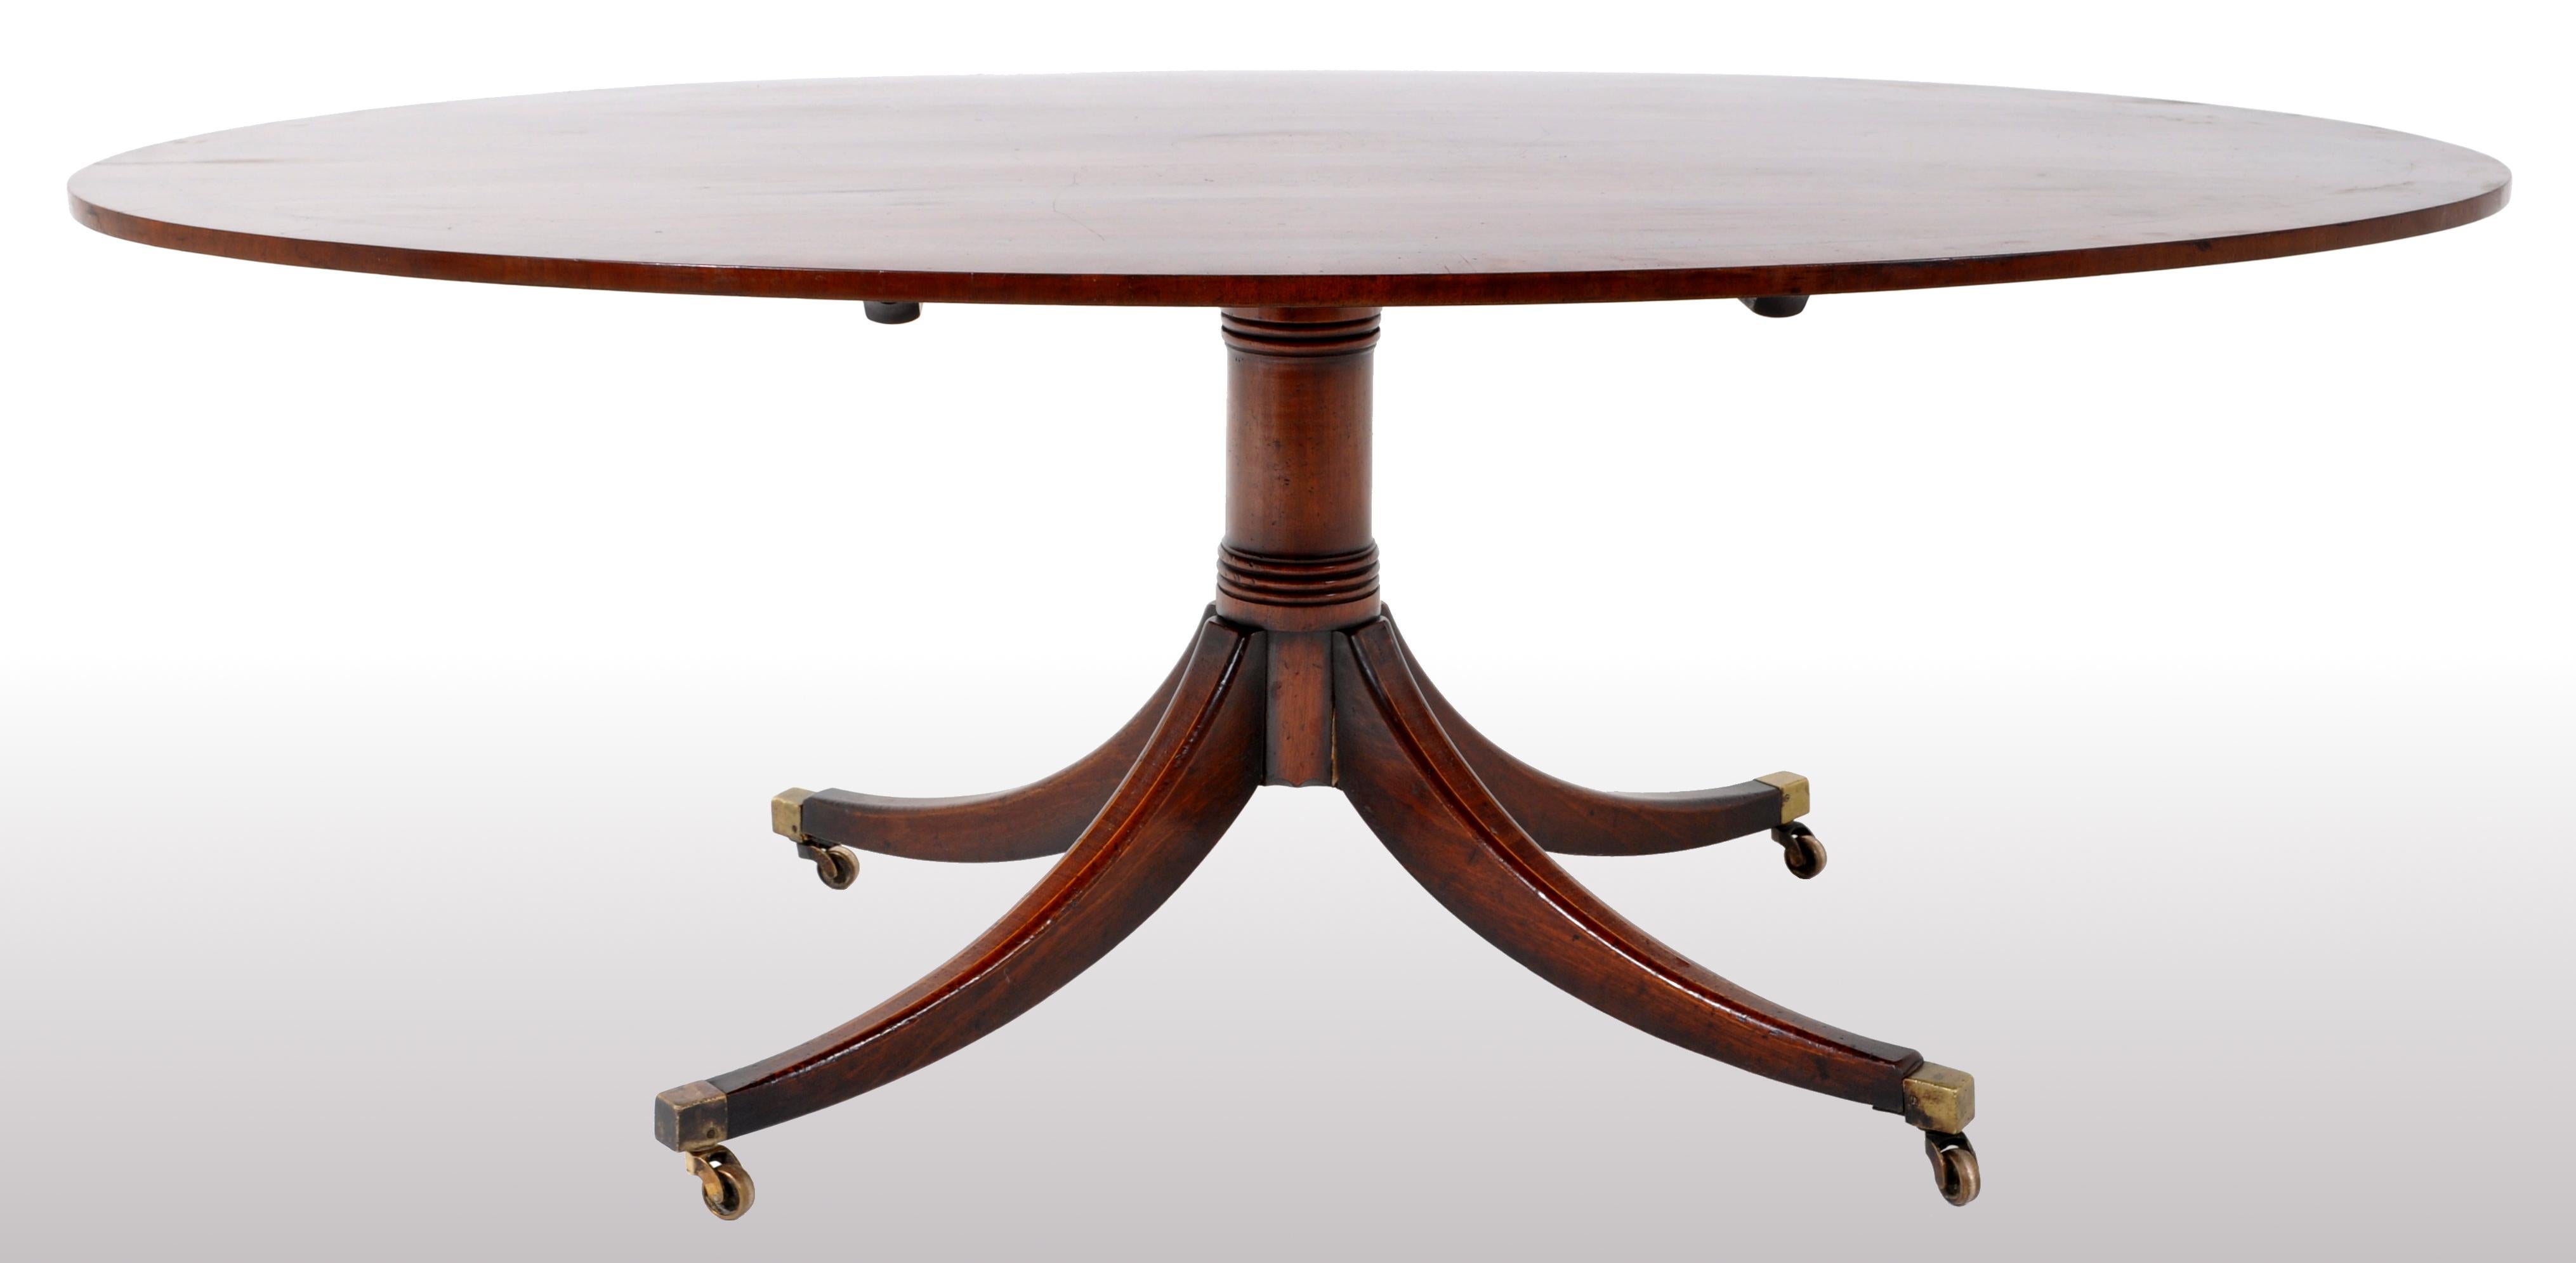 A fine and large George III tilt-top mahogany dining/breakfast table circa 1790. The table made of the finest solid Cuban flame mahogany and made of a single board, the top of oval form inlaid & crossbanded to the edge and having an oval paterae